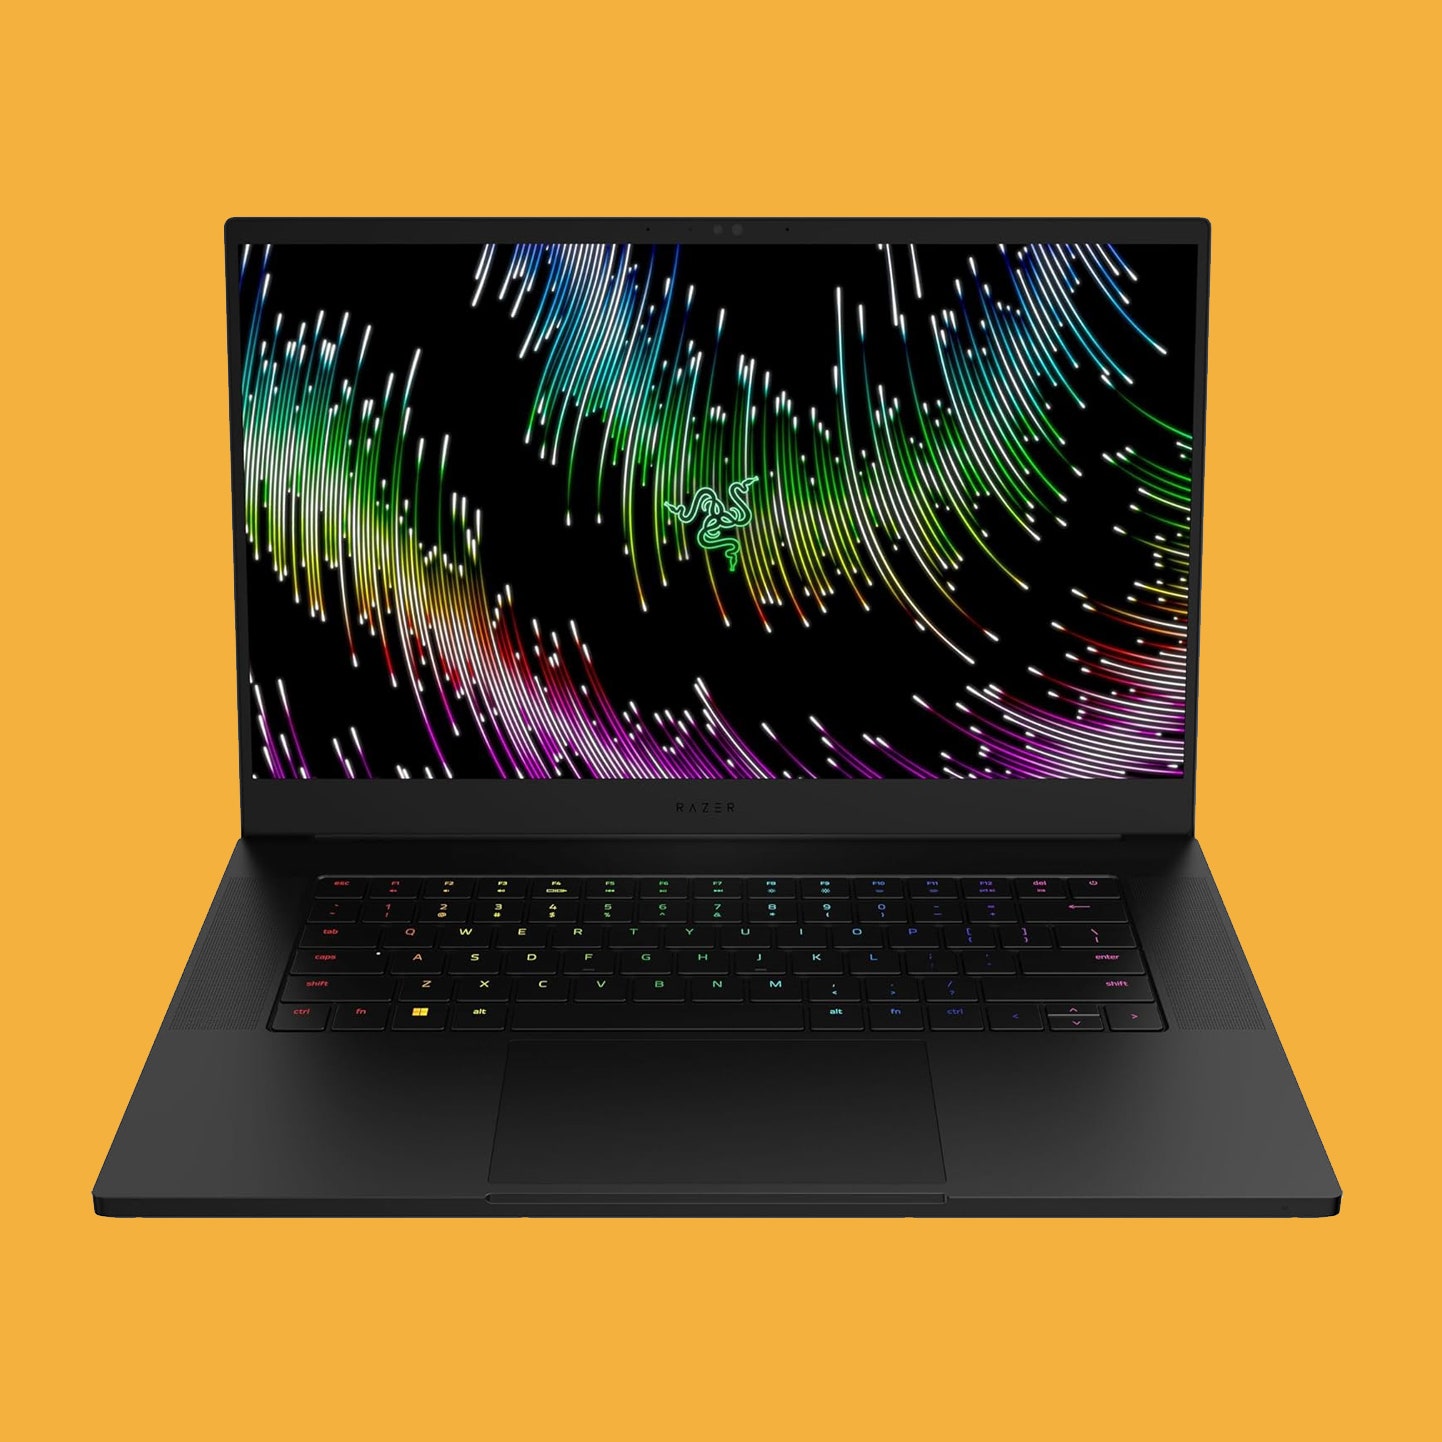 The Razer Blade 14 Has the Most Immersive Screen Ever